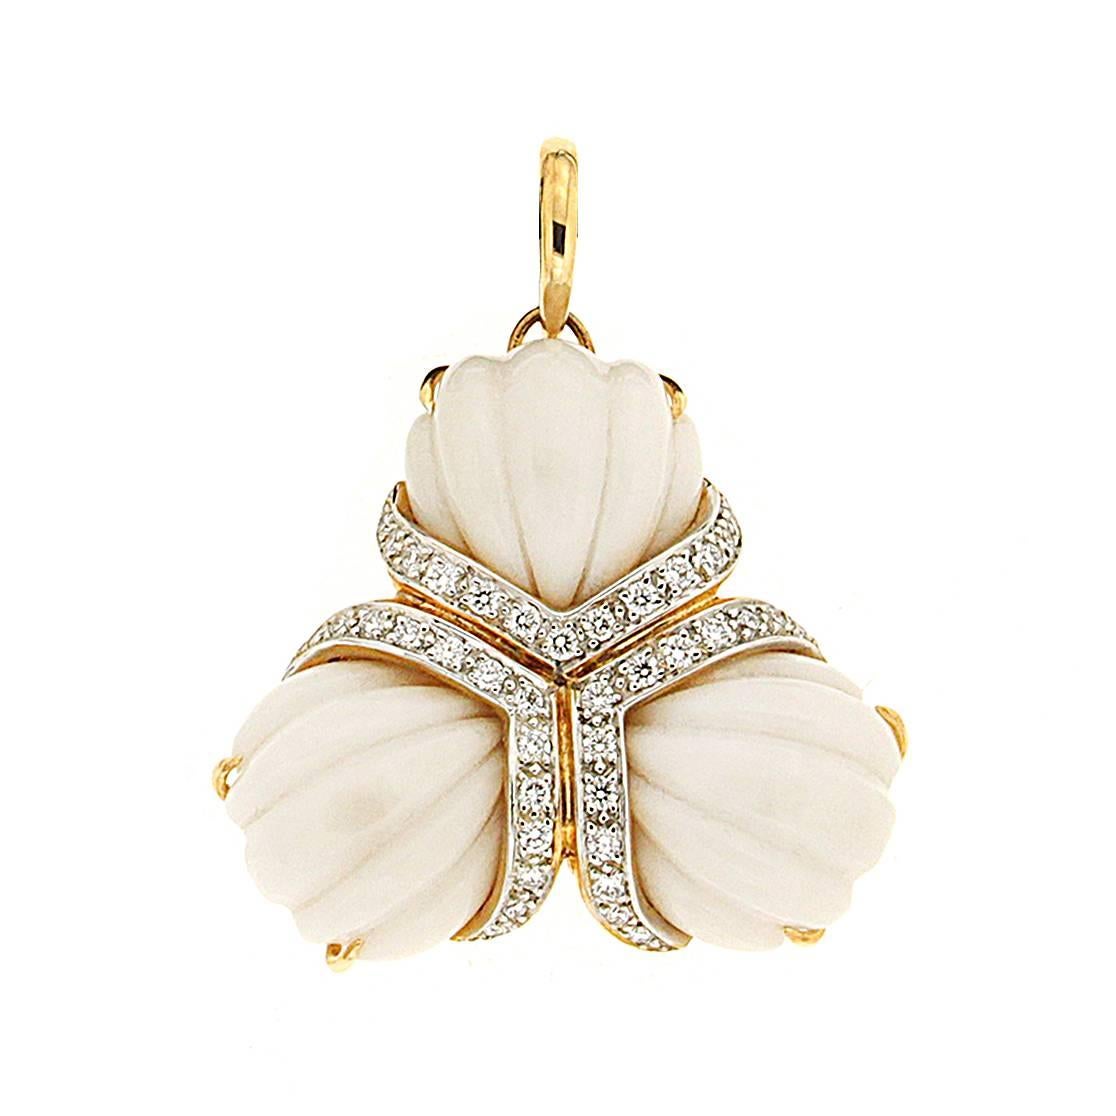 This pendant is made in 18kt yellow gold, it features cocolon and round brilliant diamonds with a carat total weight of 0.72 ctw.